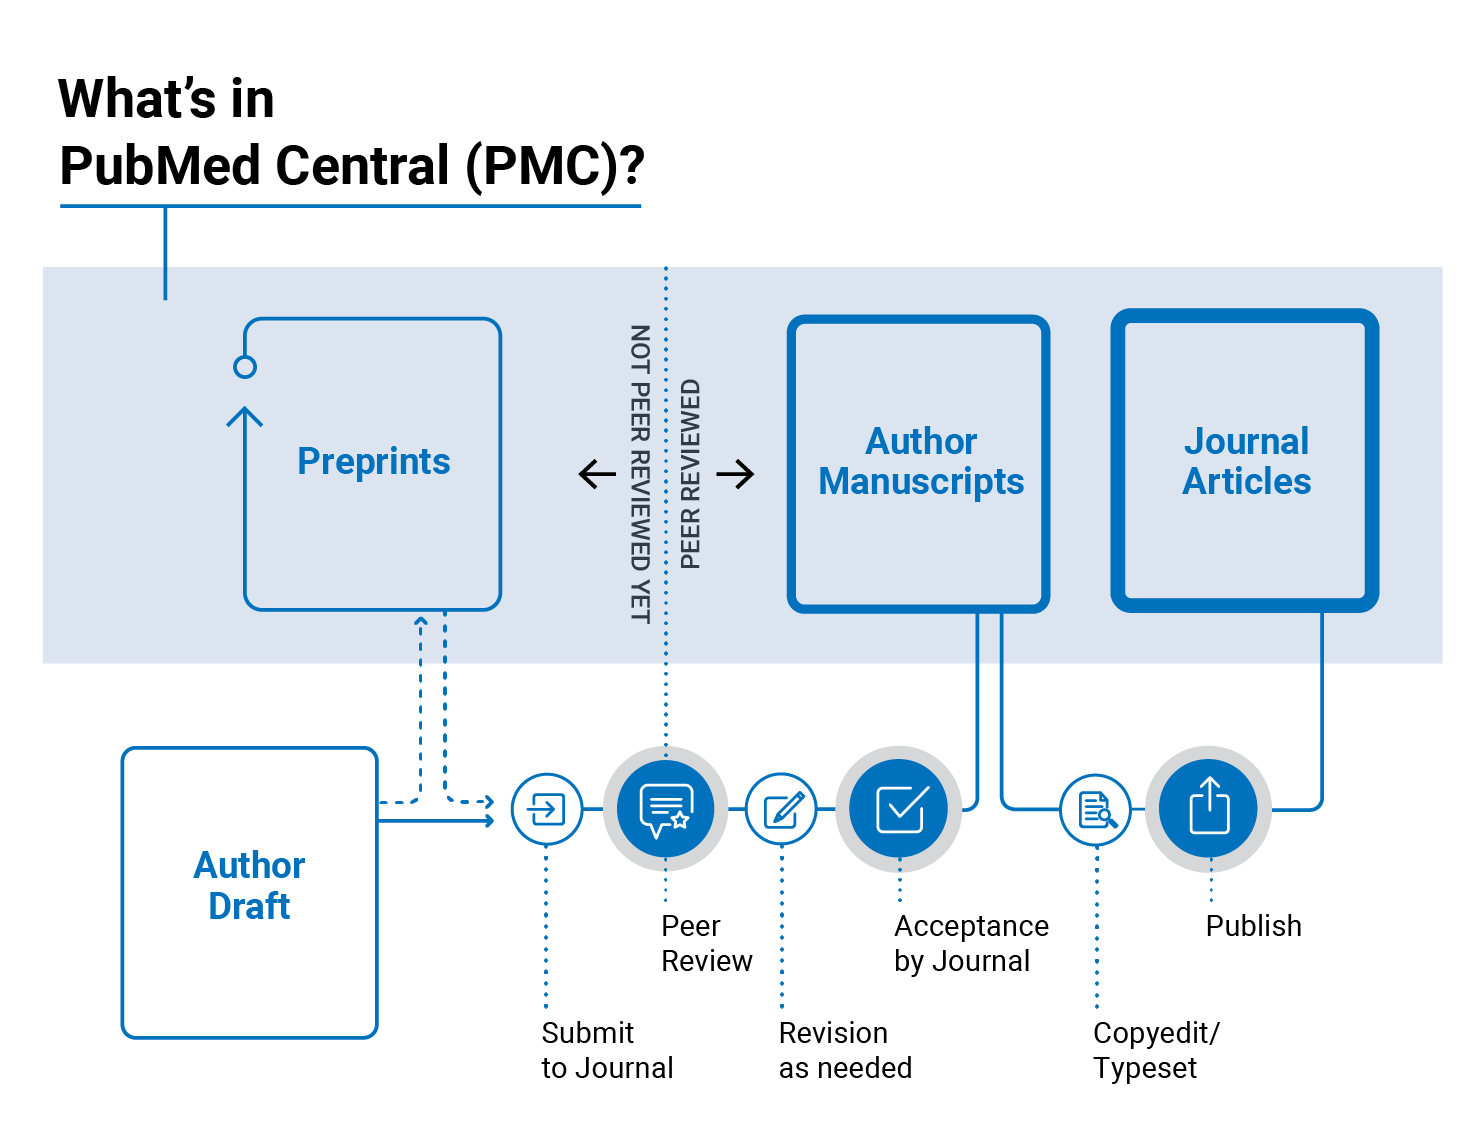 Graphic showing information about the types of records available in PMC which include preprints, author manuscripts and journal articles and the differences between them, especially highlighting that preprints are not yet peer-reviewed, while author manuscripts and journal articles have been peer reviewed.